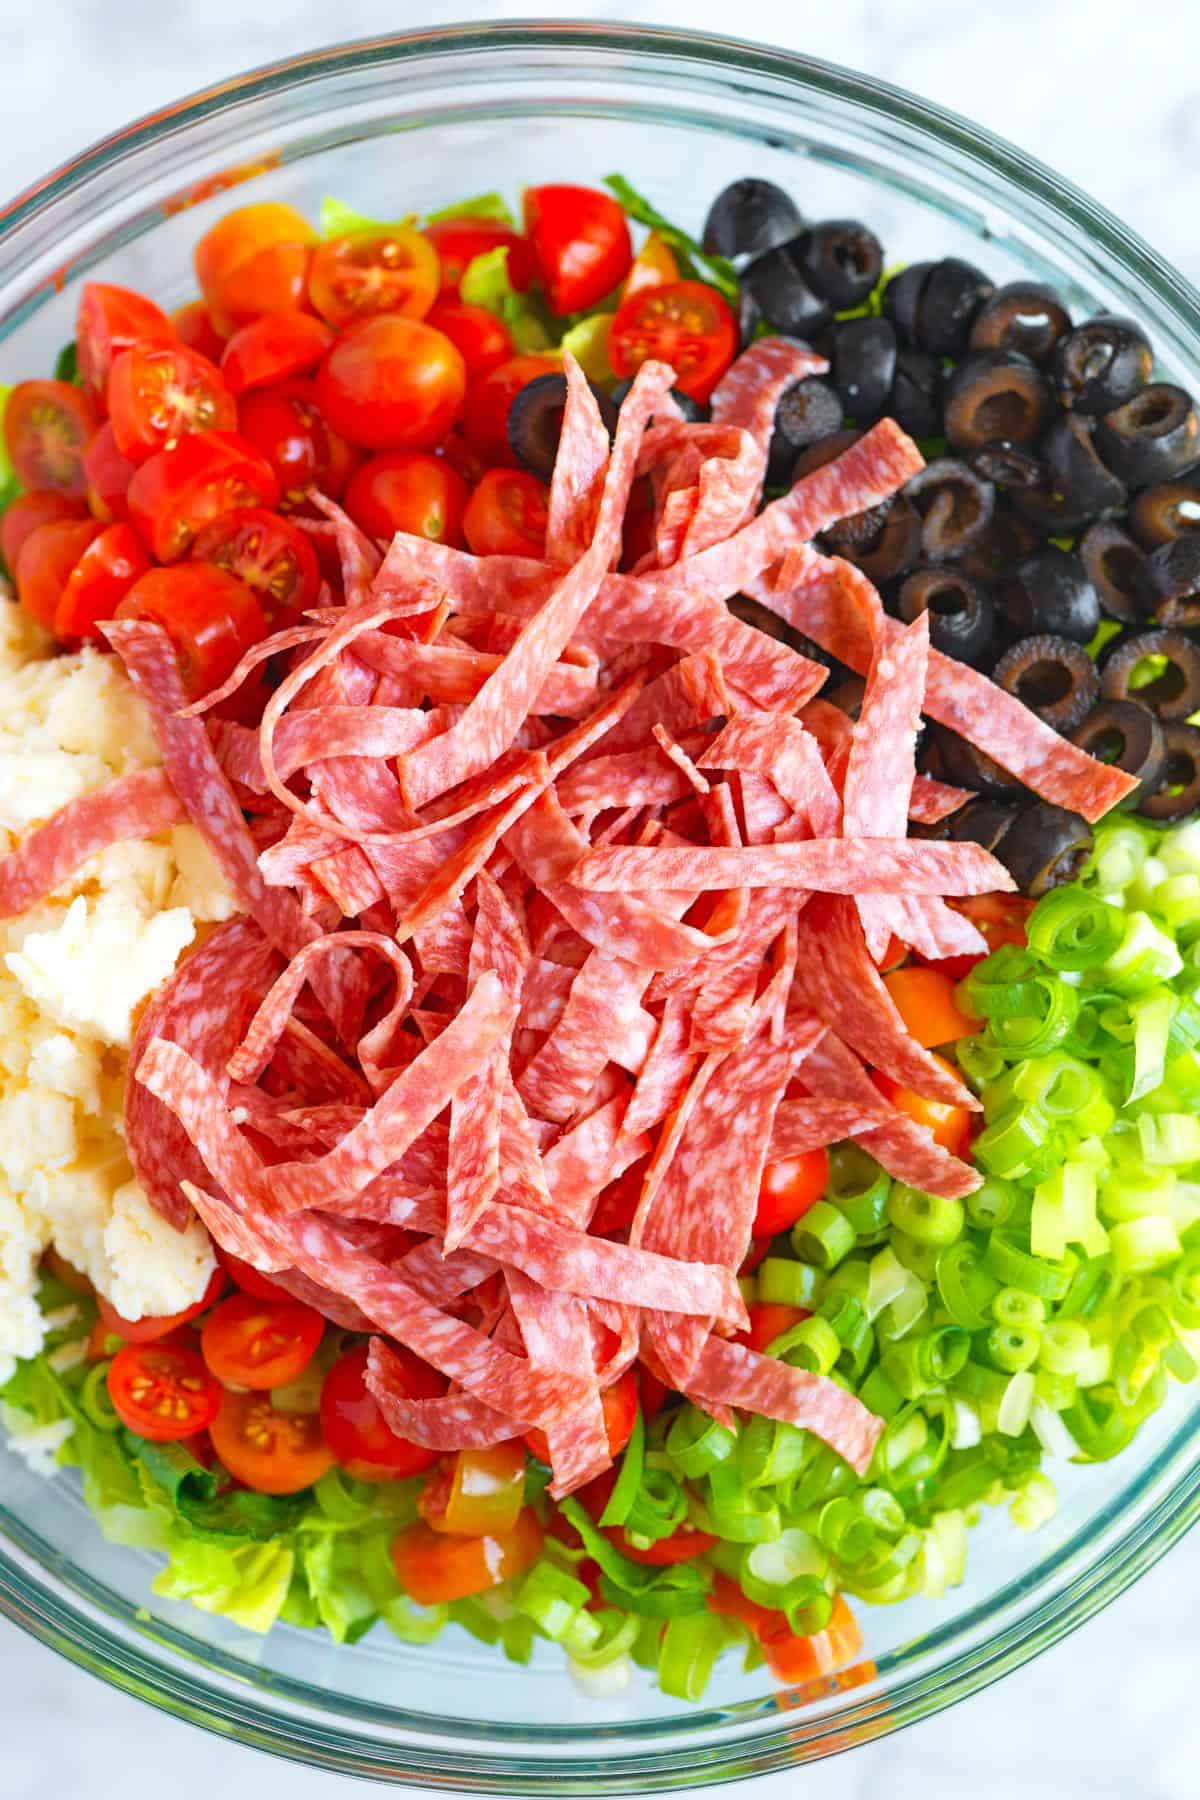 Chopped Salad Ingredients in a bowl (romaine lettuce, salami, olives, tomatoes, and cheese).